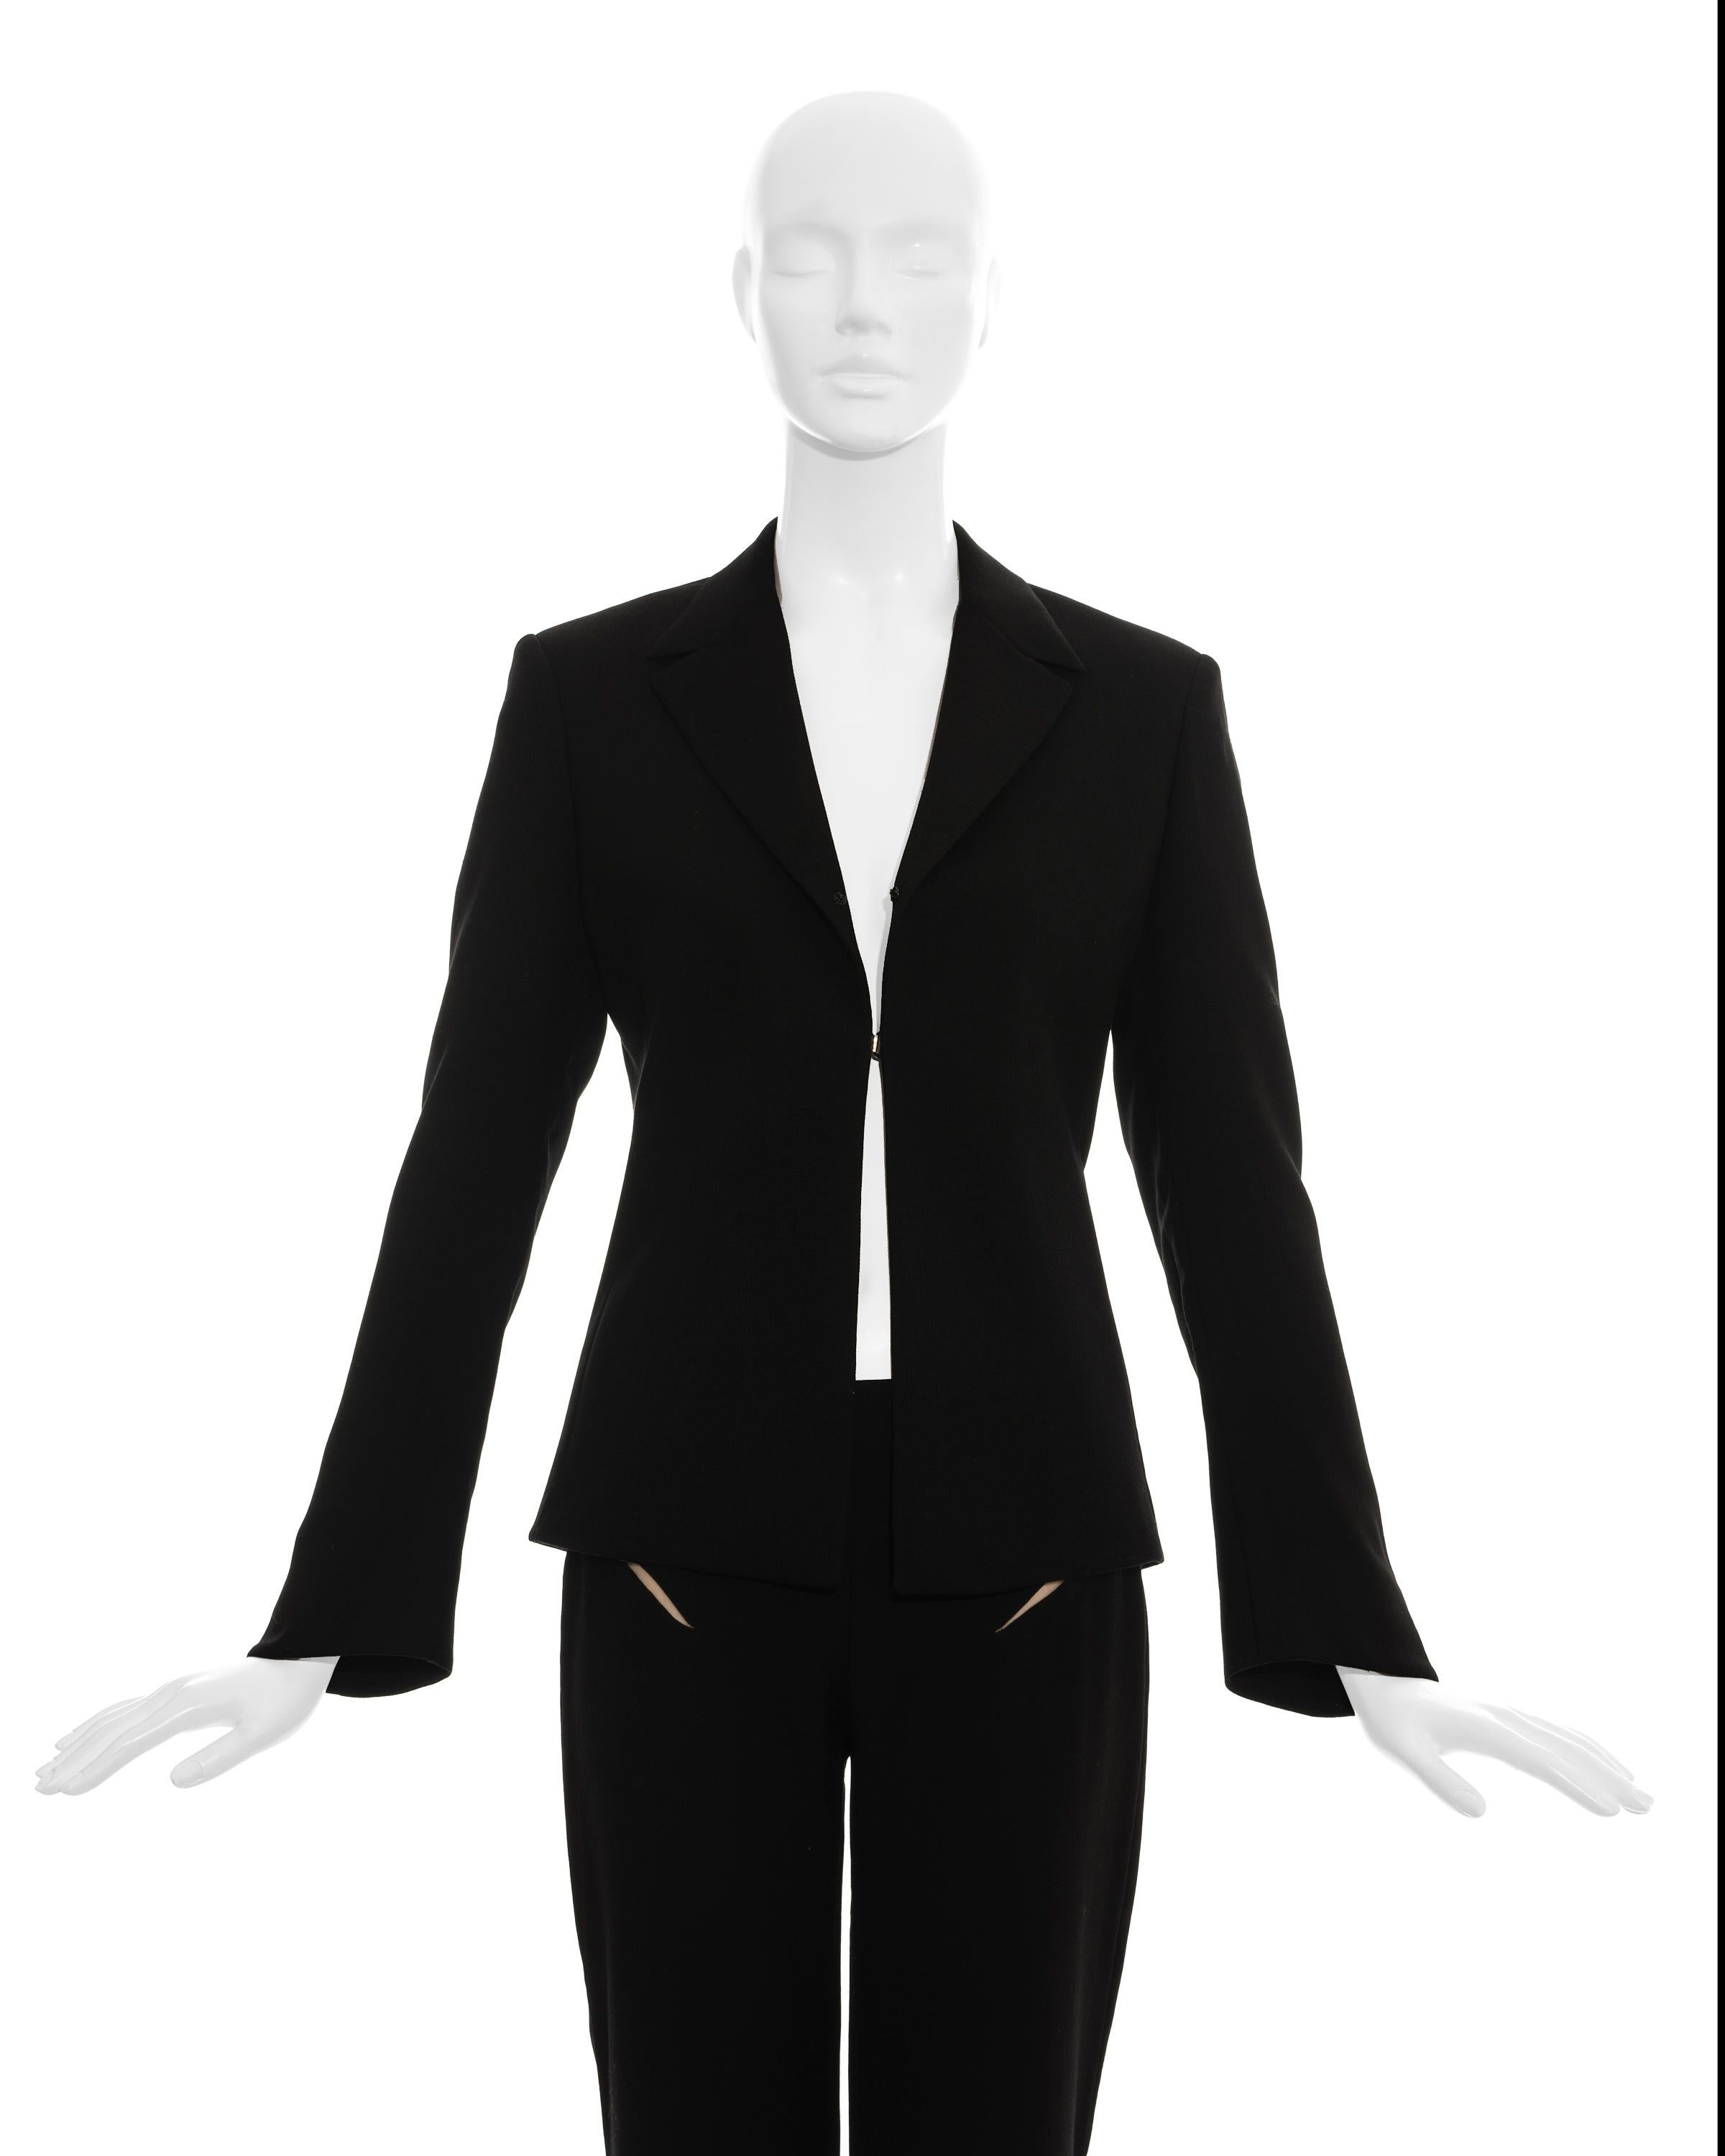 Gianni Versace Couture black pant suit in light wool with flesh-coloured mesh inserts

Spring-summer 1998